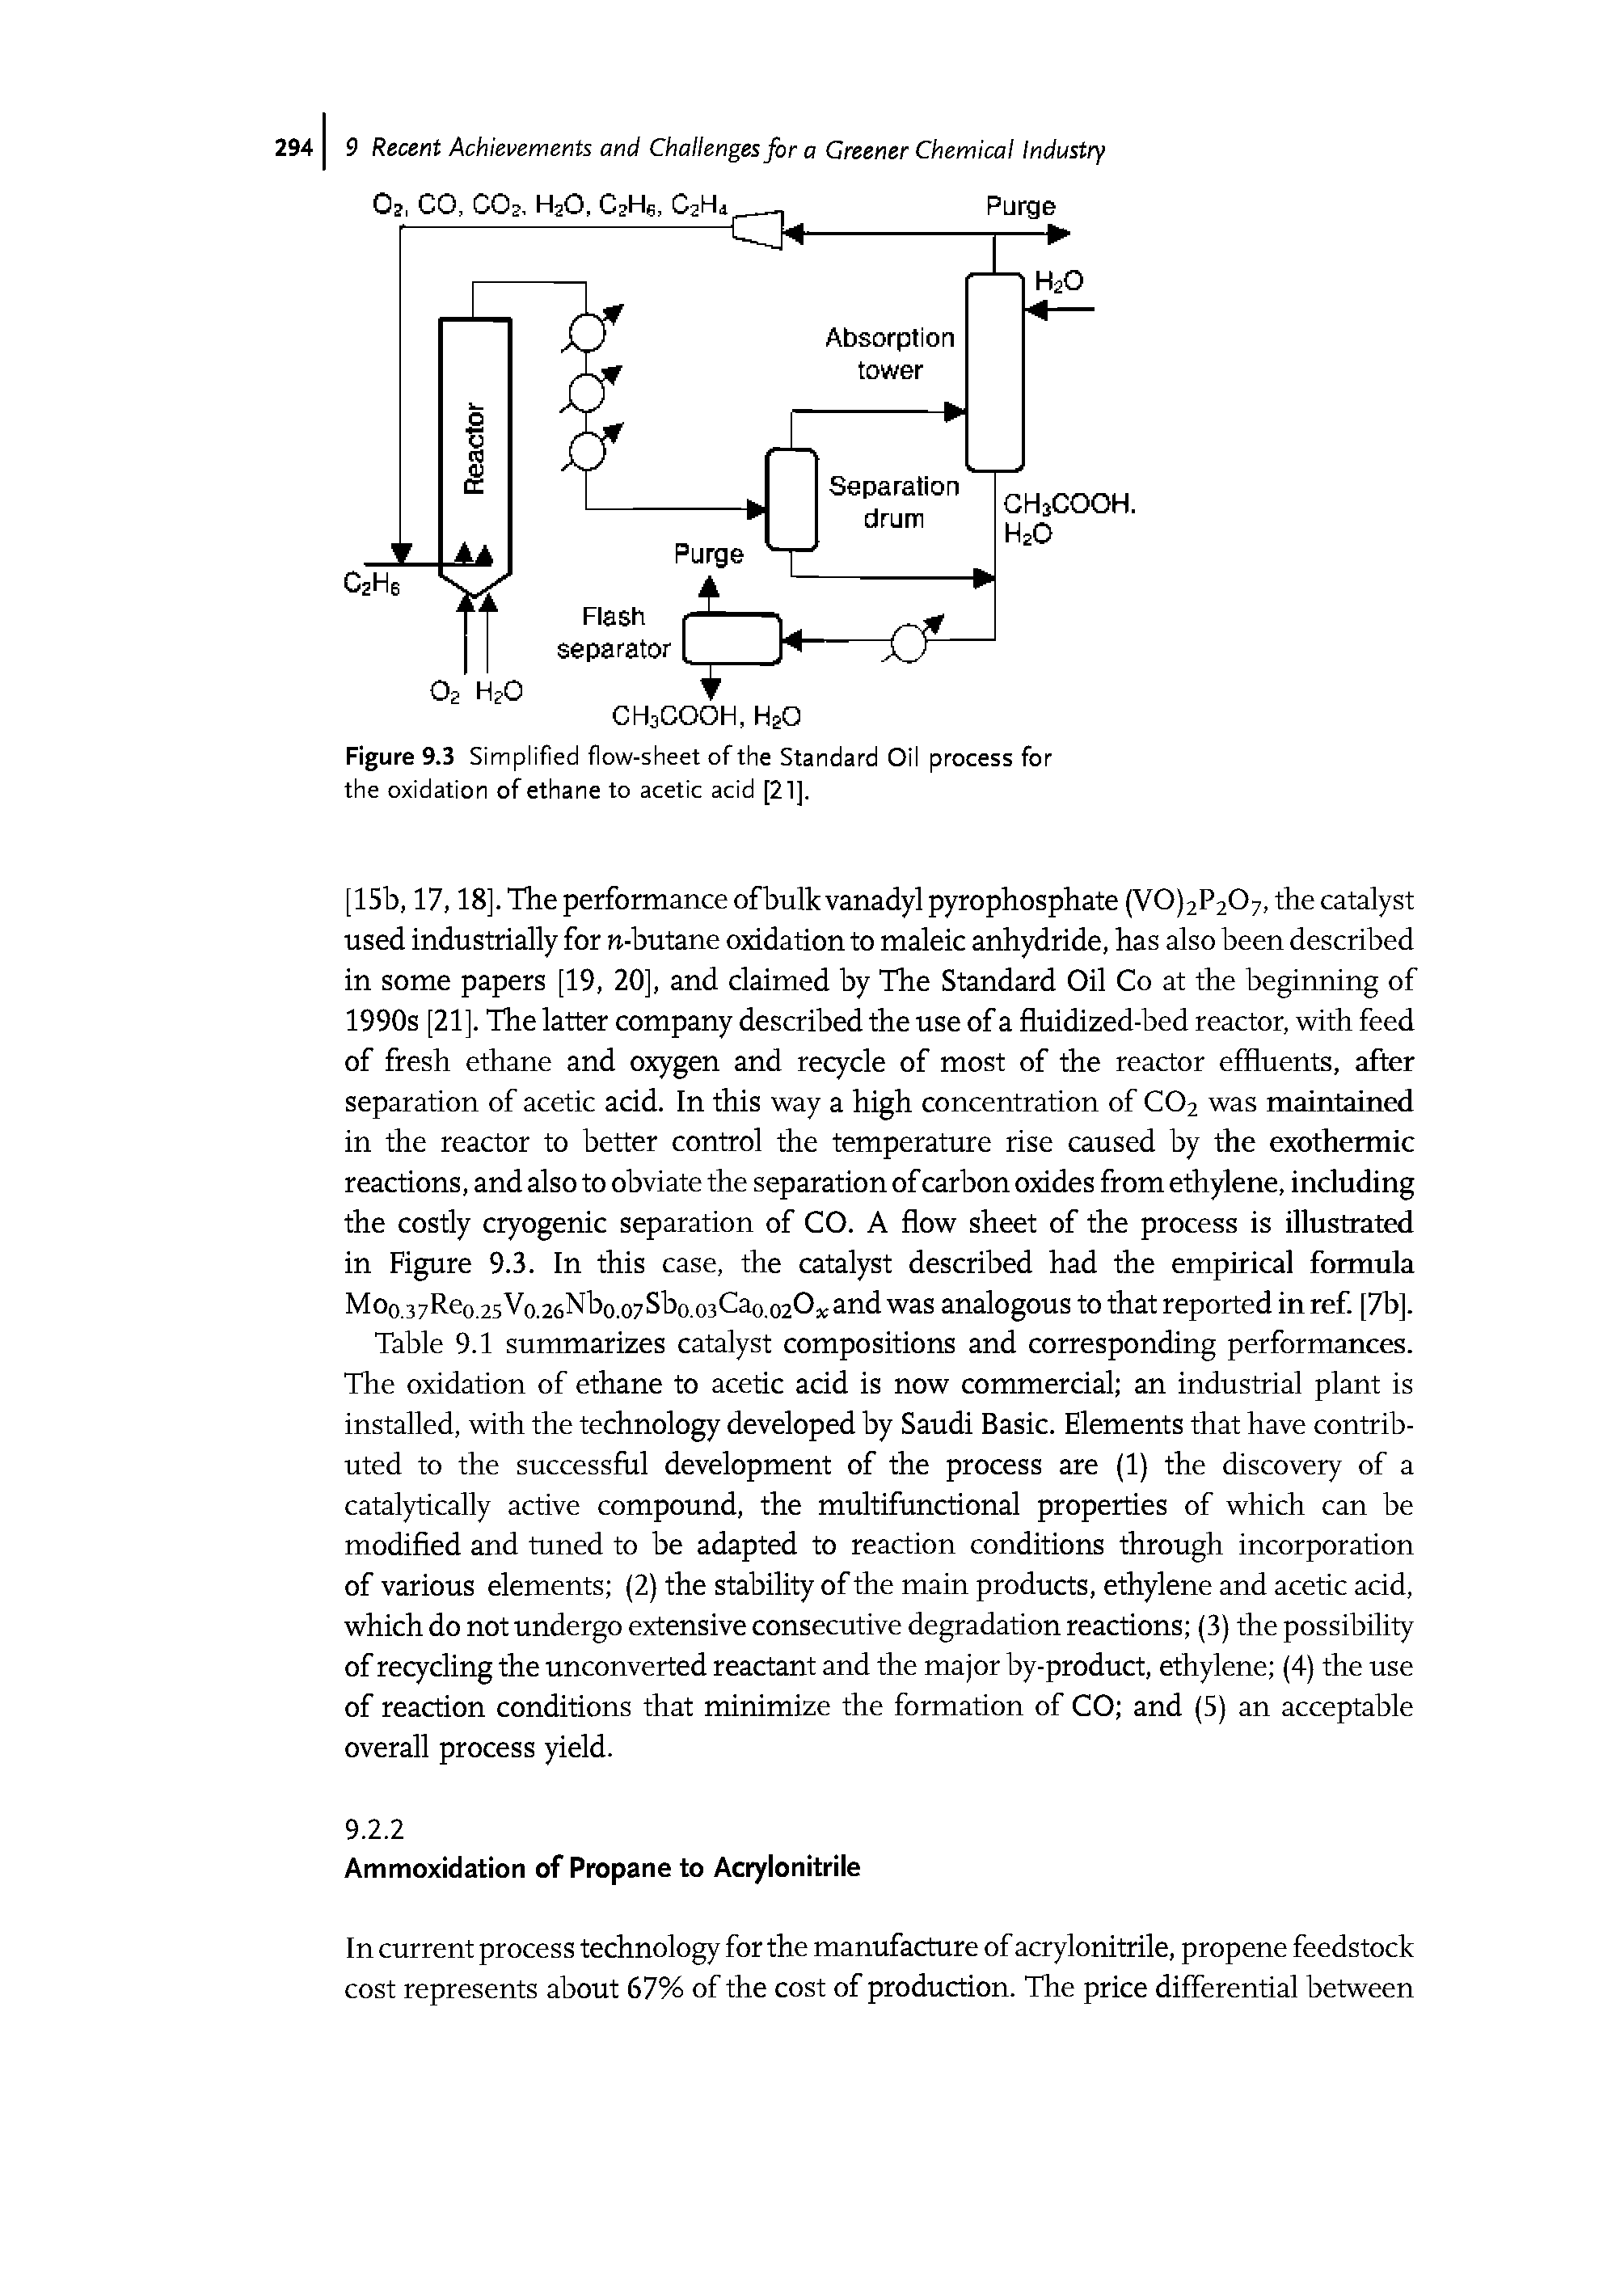 Figure 9.3 Simplified flow-sheet of the Standard Oil process for the oxidation of ethane to acetic acid [21],...